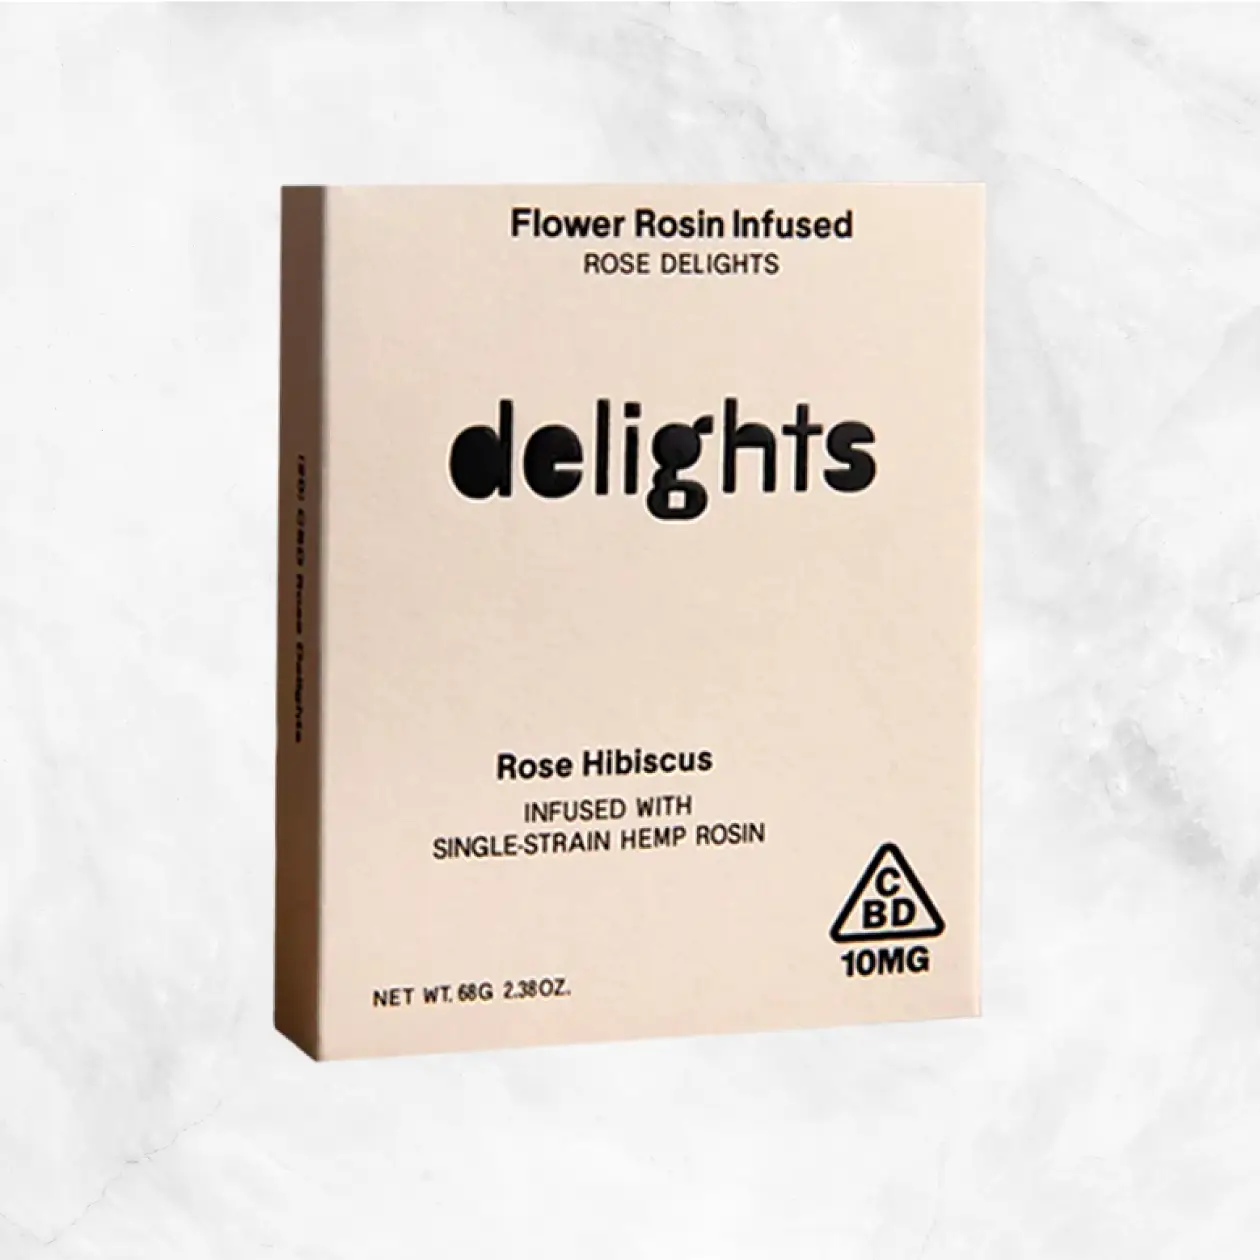 Rose Hibiscus Delights Delivery